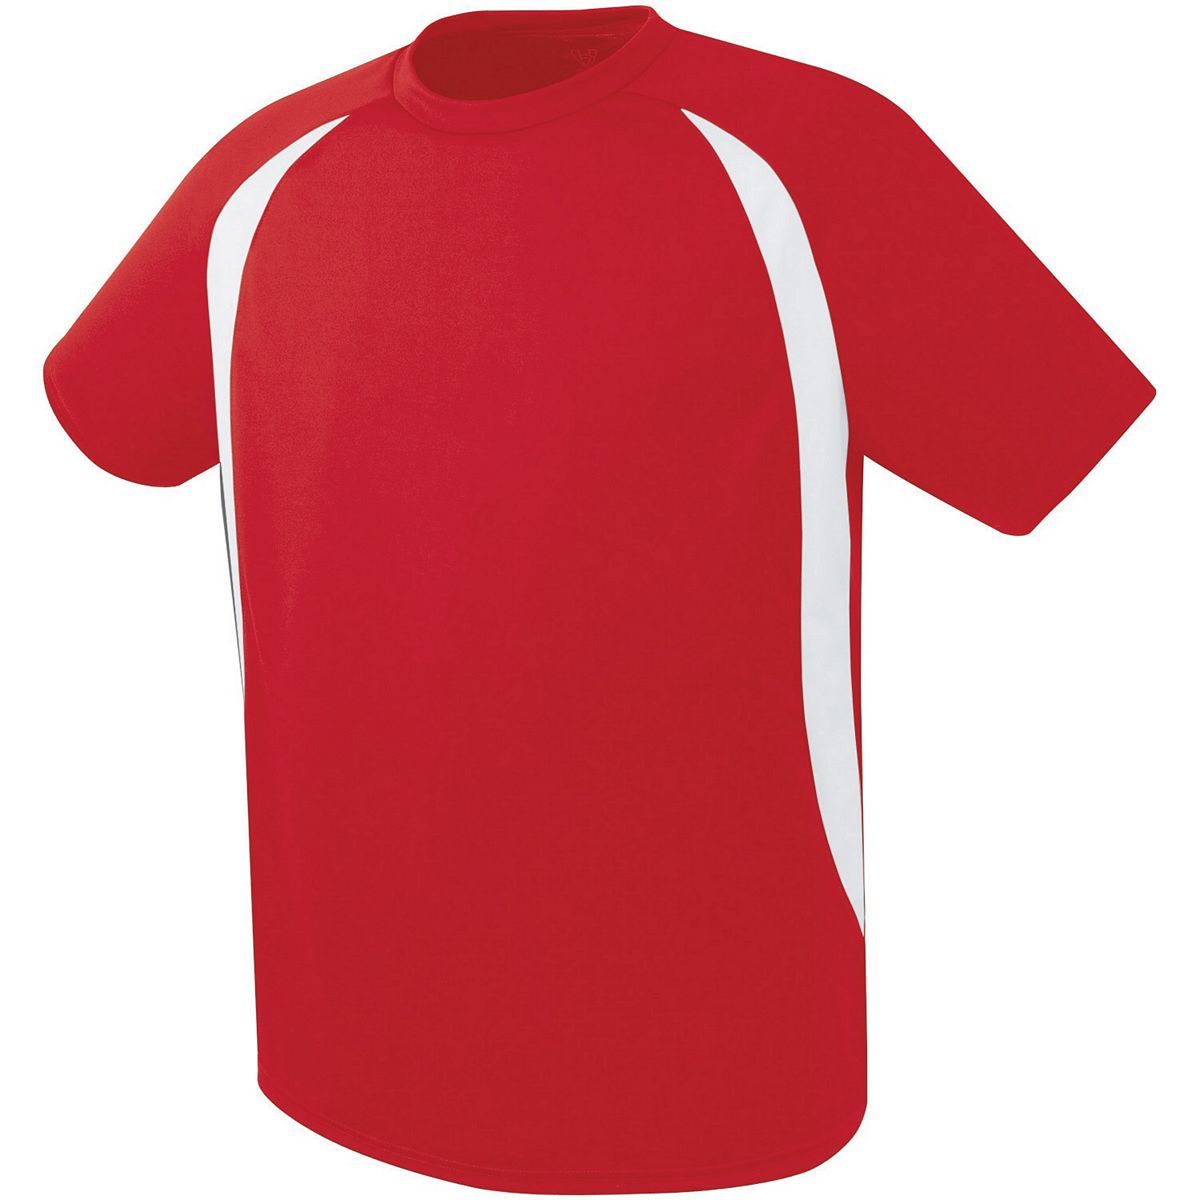 High 5 Youth Liberty Soccer Jersey in Scarlet/White  -Part of the Youth, Youth-Jersey, High5-Products, Soccer, Shirts, All-Sports-1 product lines at KanaleyCreations.com